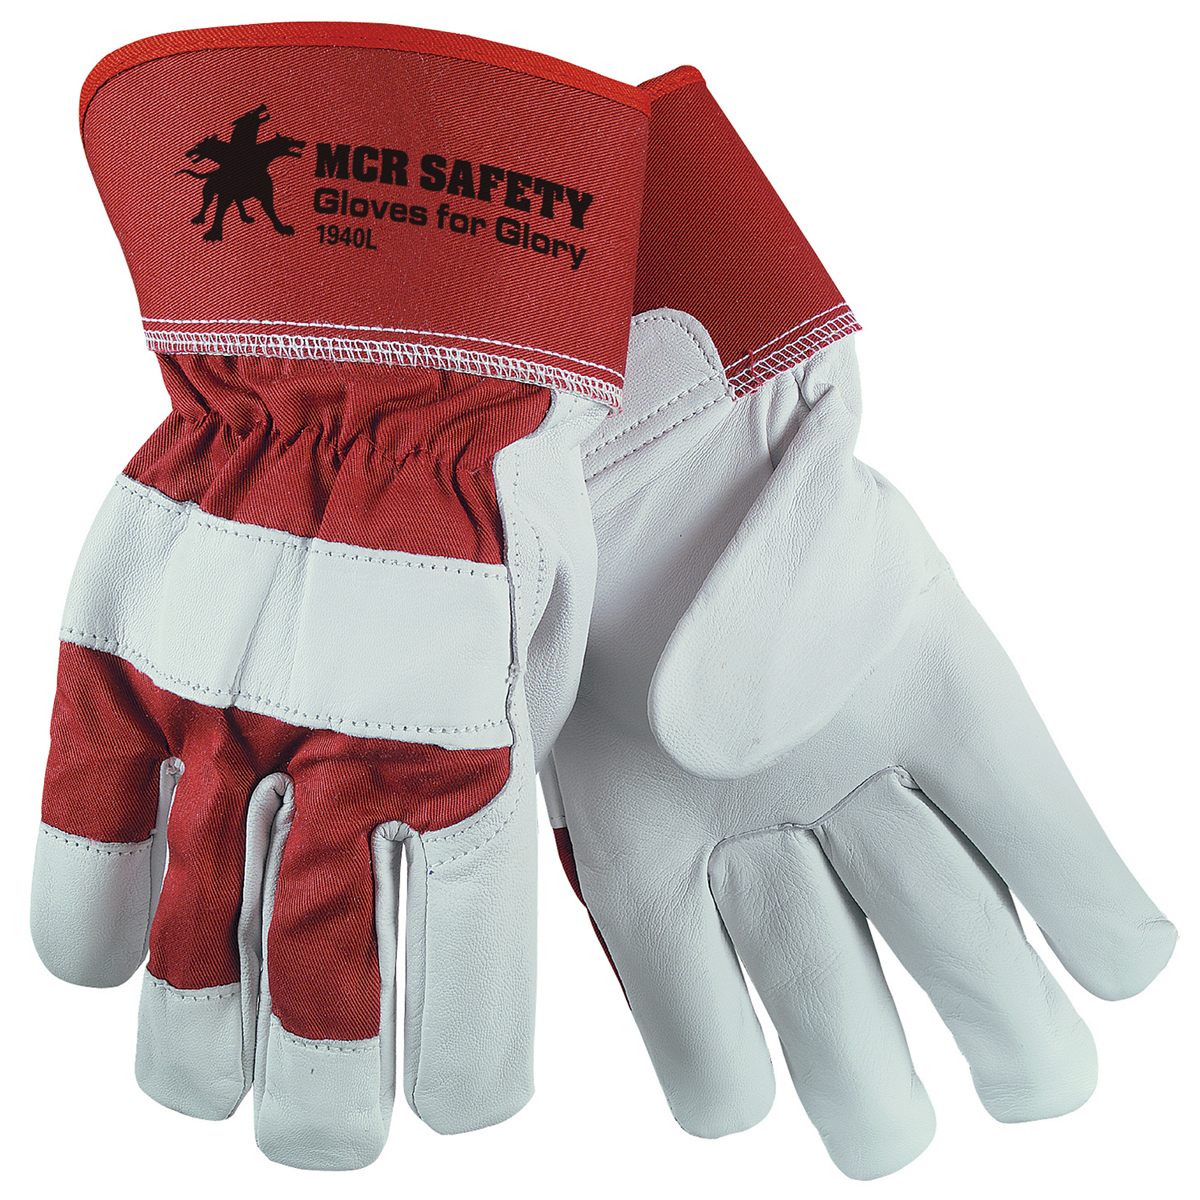 MCR Safety Large White And Red Premium Grain Goatskin Palm Gloves With Fabric Back And Rubberized Safety Cuff